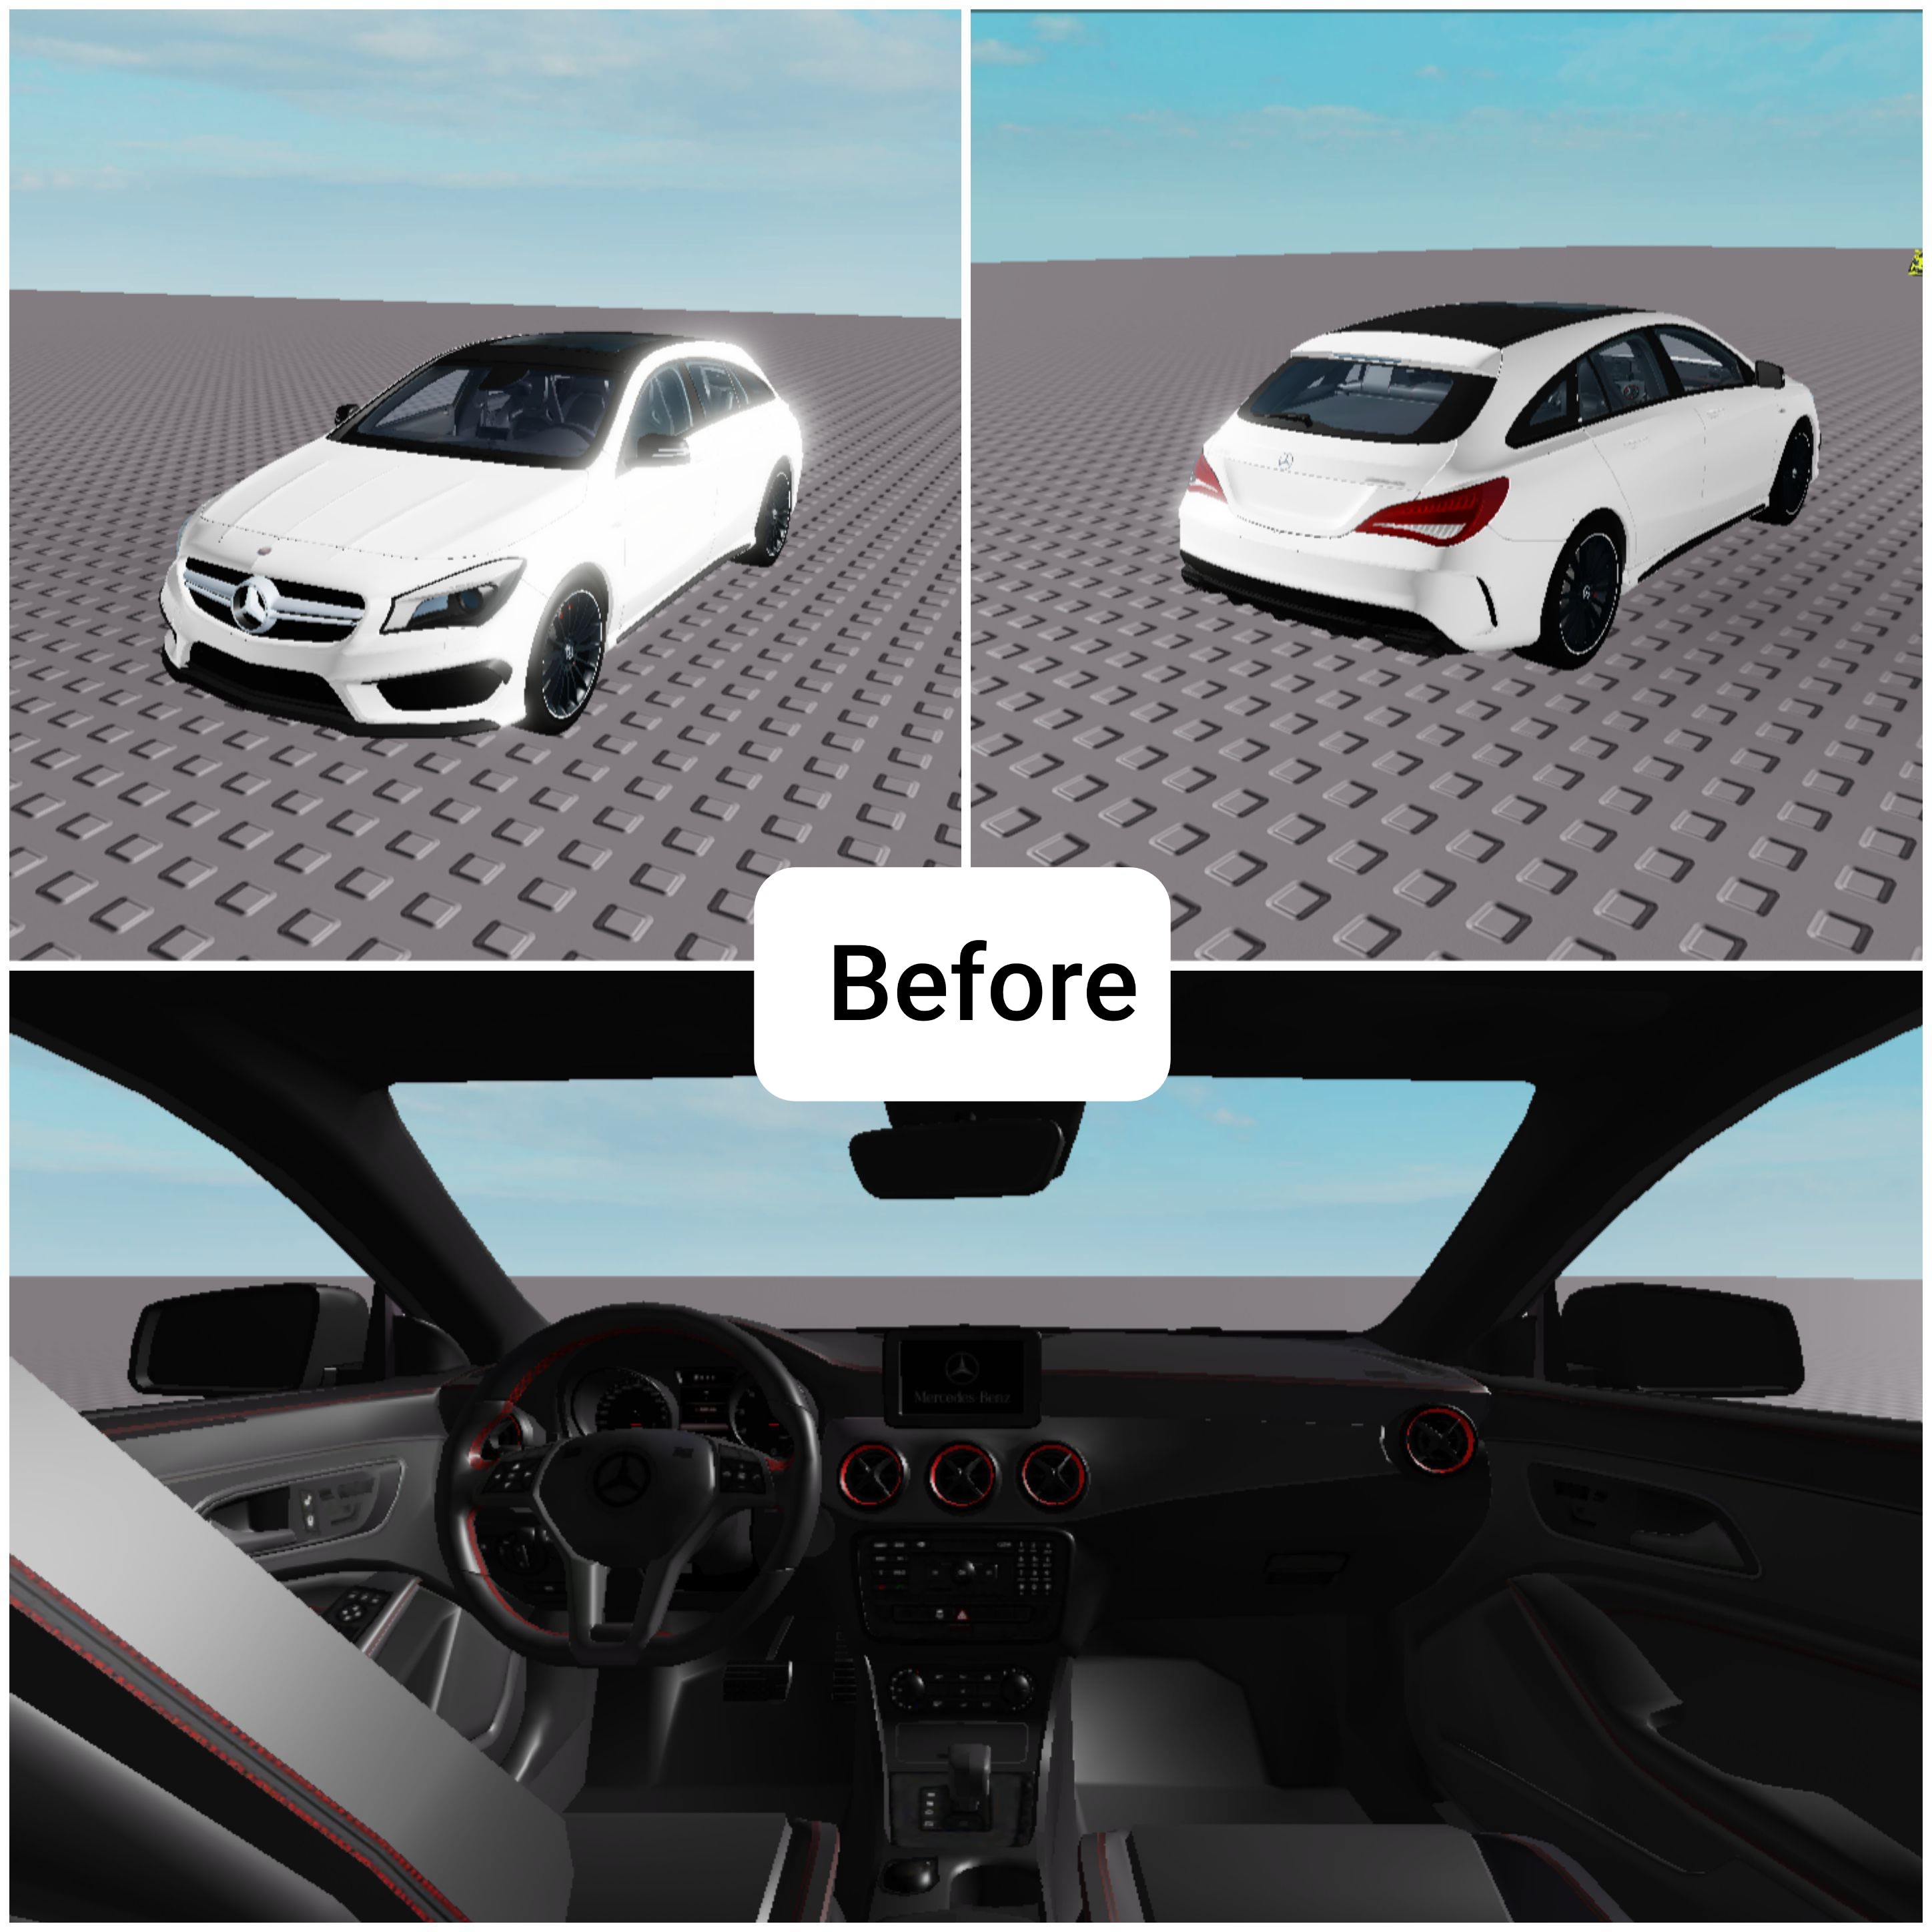 Modify Your Car Model In Roblox Studio With The Specifications You Desire By Sebastian Yeong Fiverr - how to make a car in roblox studio 2021